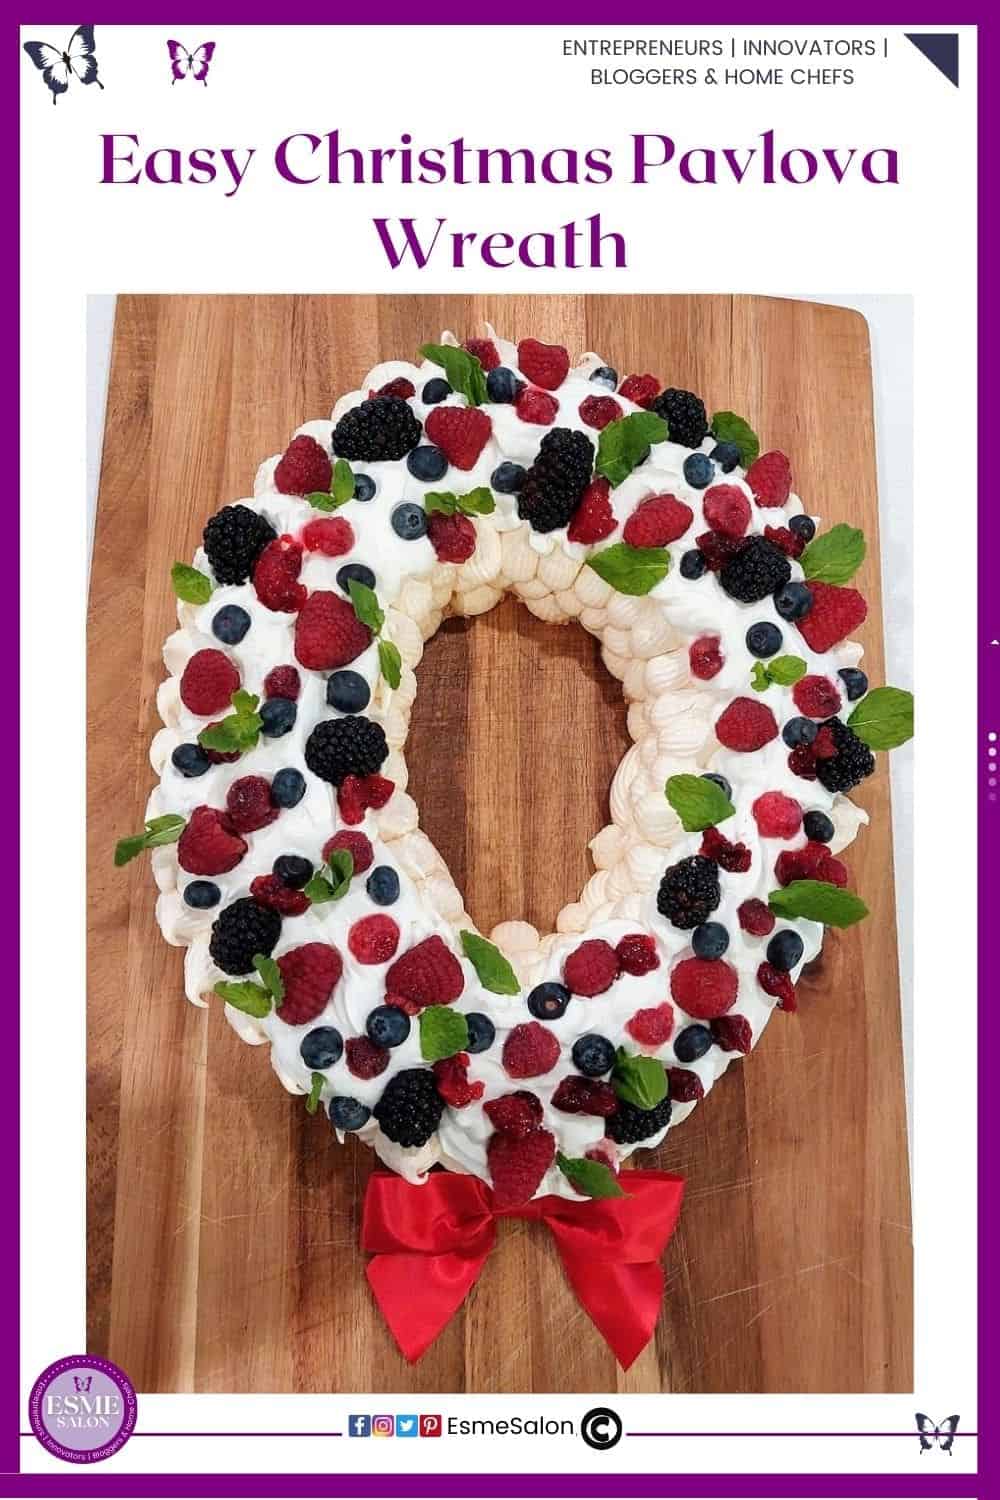 an image of a round Christmas Pavlova Wreath with lots of fruit, mint leaves and a red bow red at the bottom